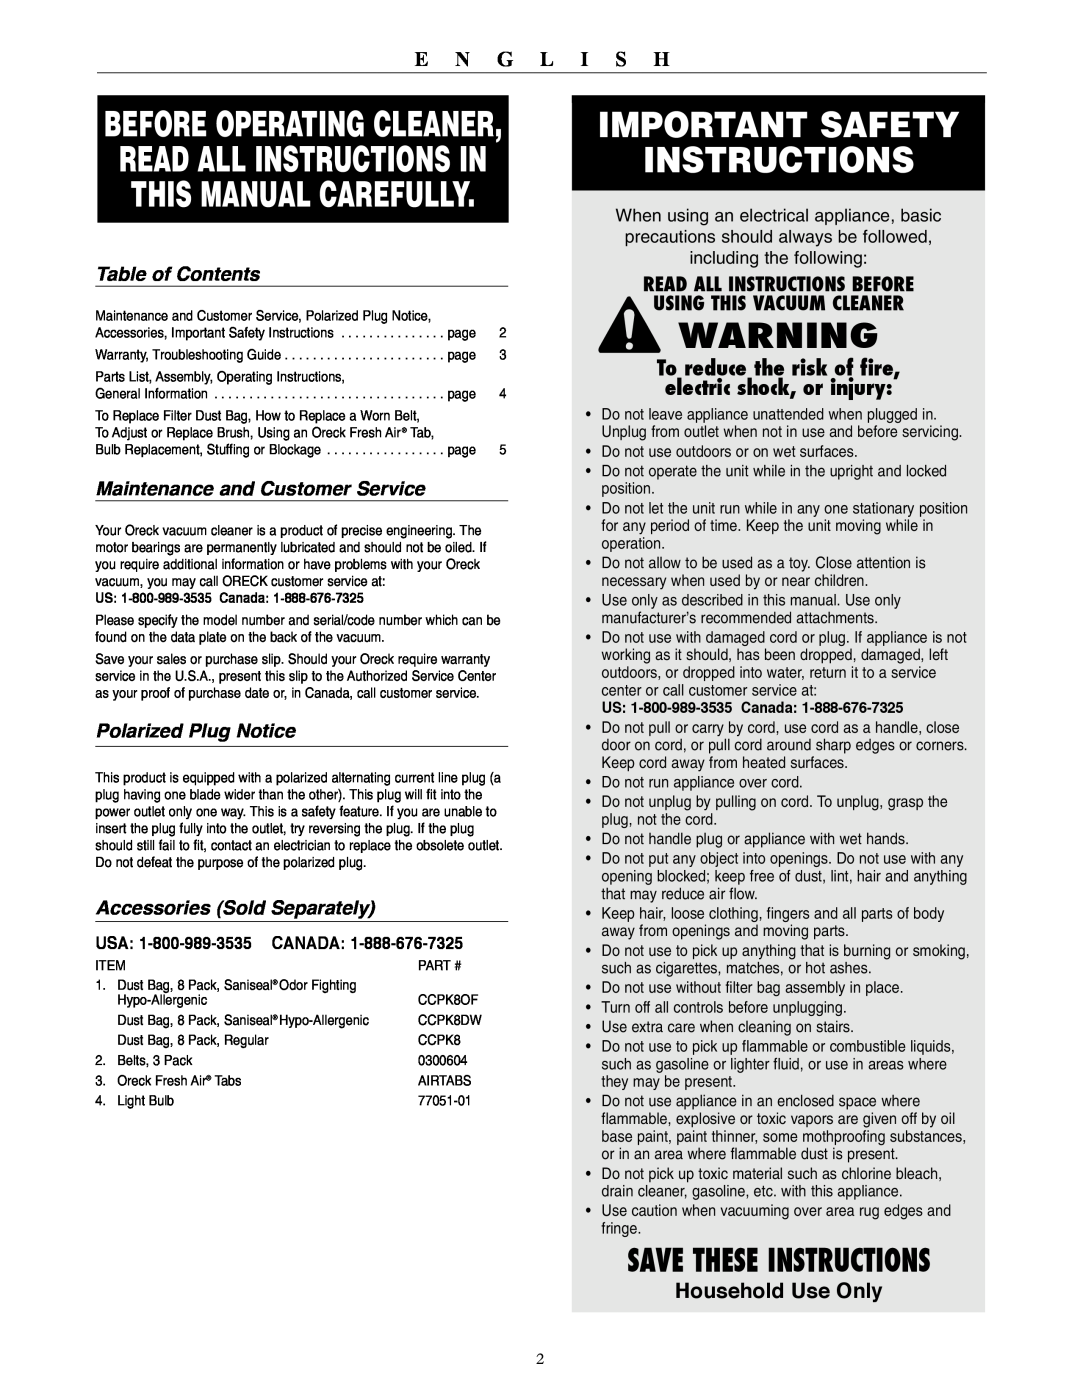 Oreck U3120HH Important Safety Instructions, Save These Instructions, E n g l i s h, Household Use Only, Table of Contents 